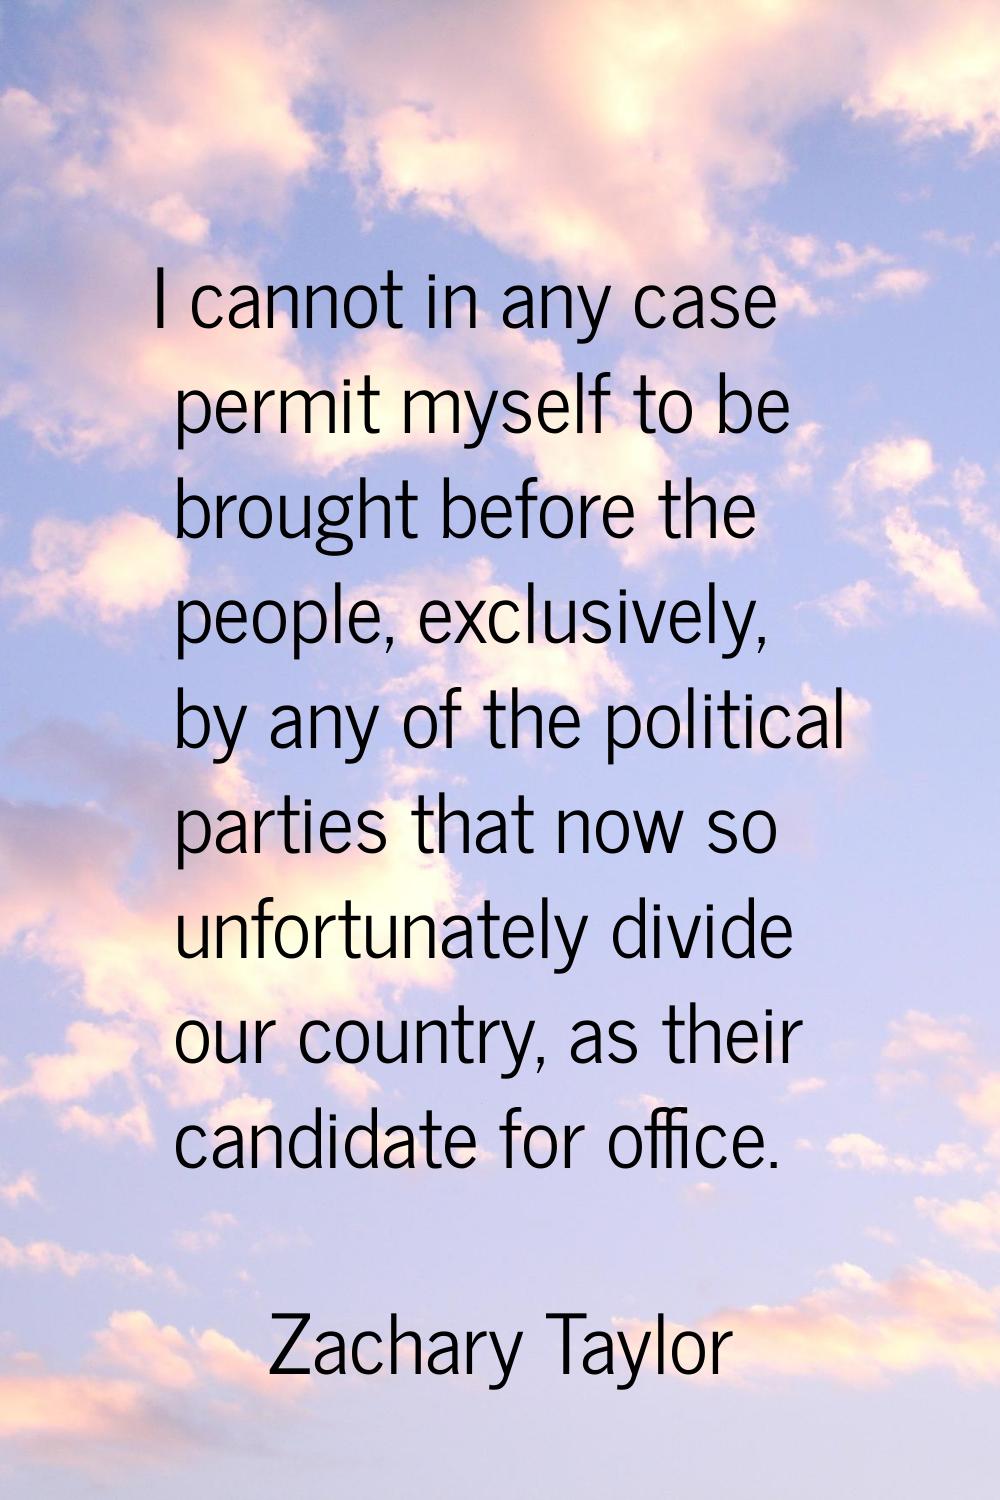 I cannot in any case permit myself to be brought before the people, exclusively, by any of the poli